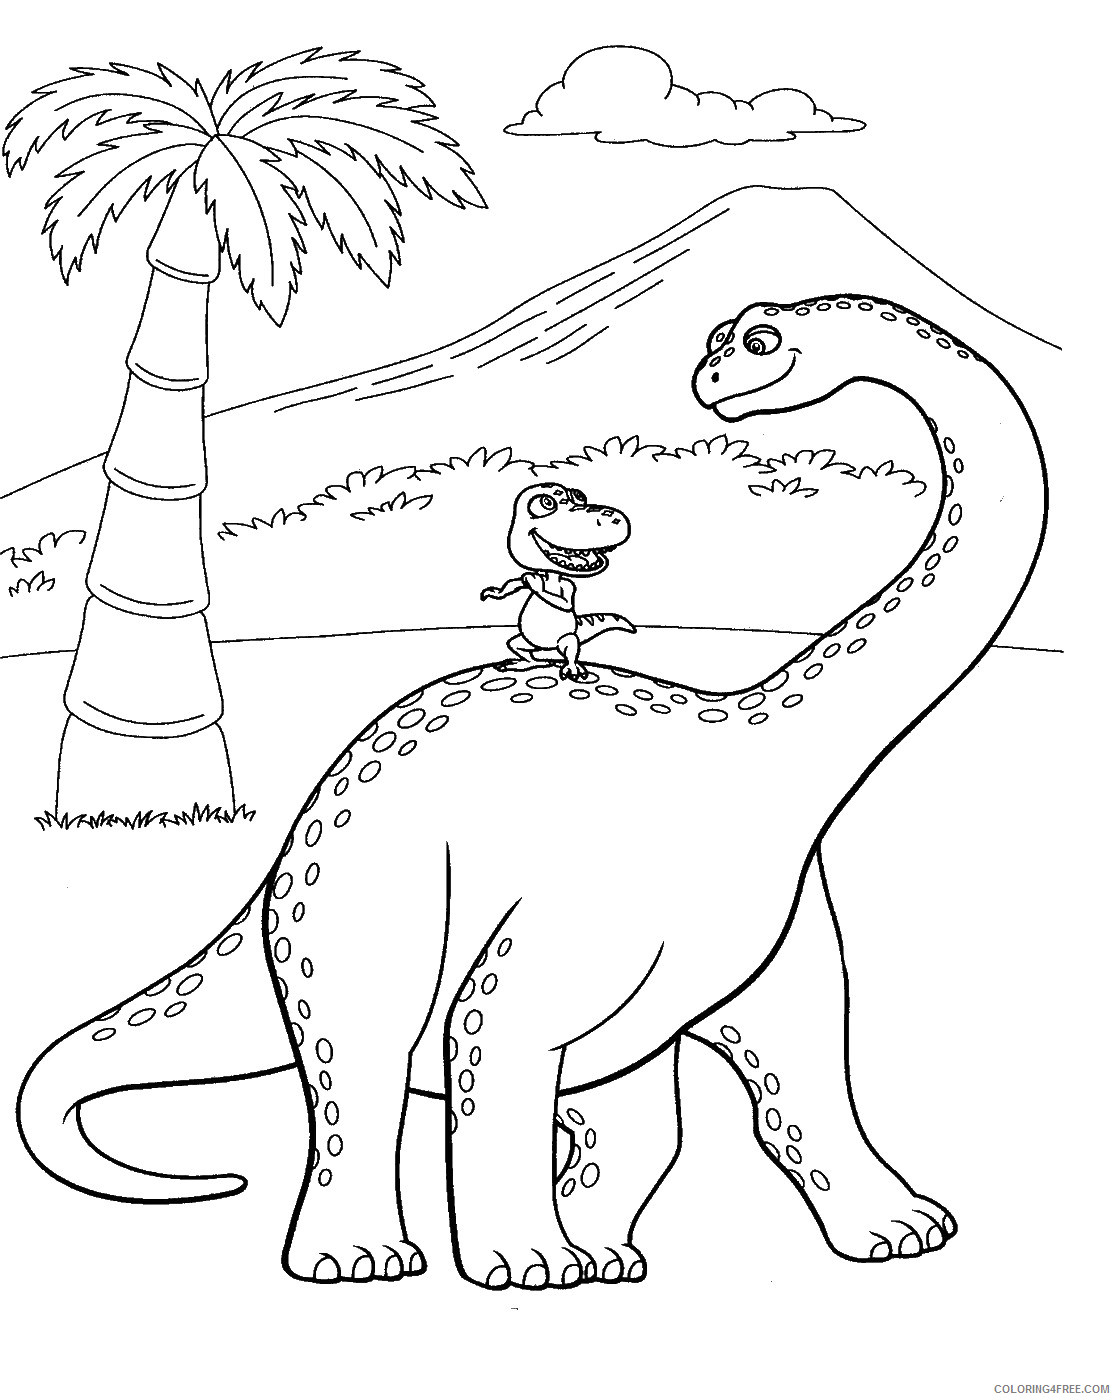 Dinosaur Train Coloring Pages Cartoons dino_train_cl_34 Printable 2020 2255 Coloring4free